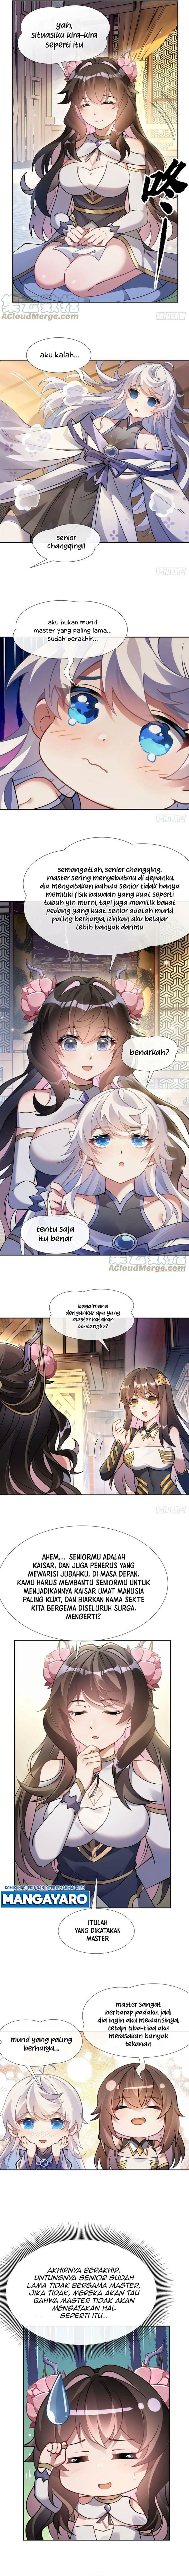 Dilarang COPAS - situs resmi www.mangacanblog.com - Komik my female apprentices are all big shots from the future 161 - chapter 161 162 Indonesia my female apprentices are all big shots from the future 161 - chapter 161 Terbaru 4|Baca Manga Komik Indonesia|Mangacan